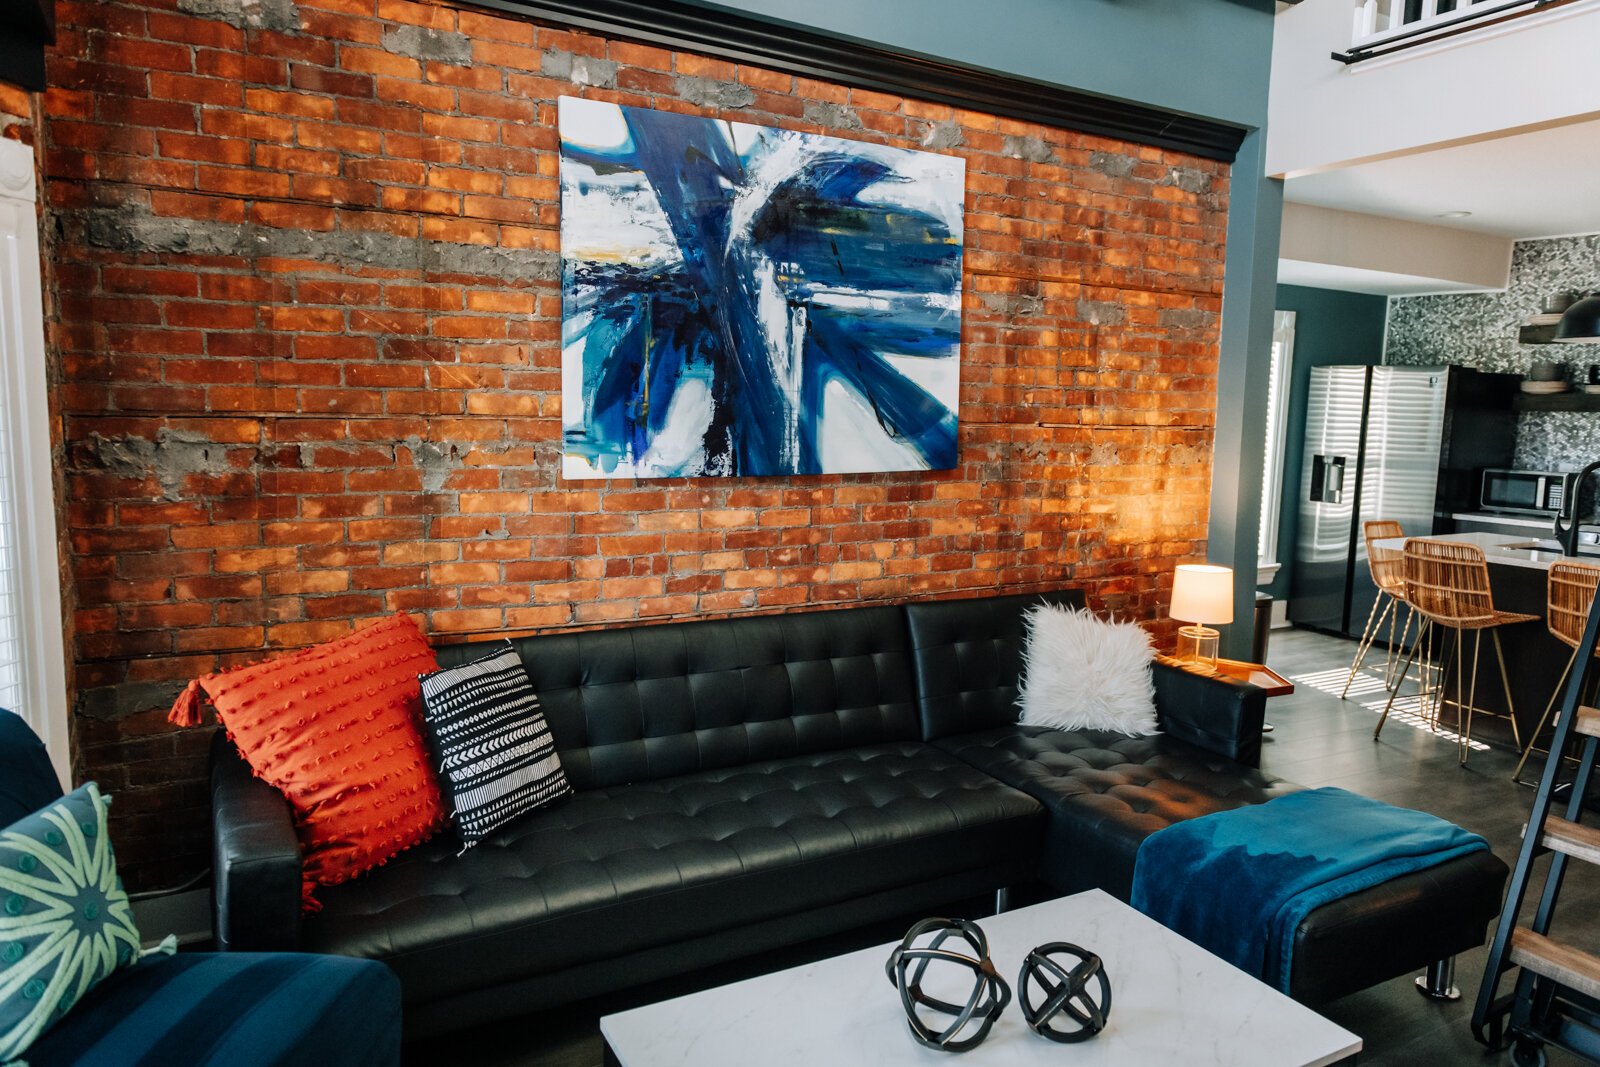 The living room area features local art from Jill Weikart.